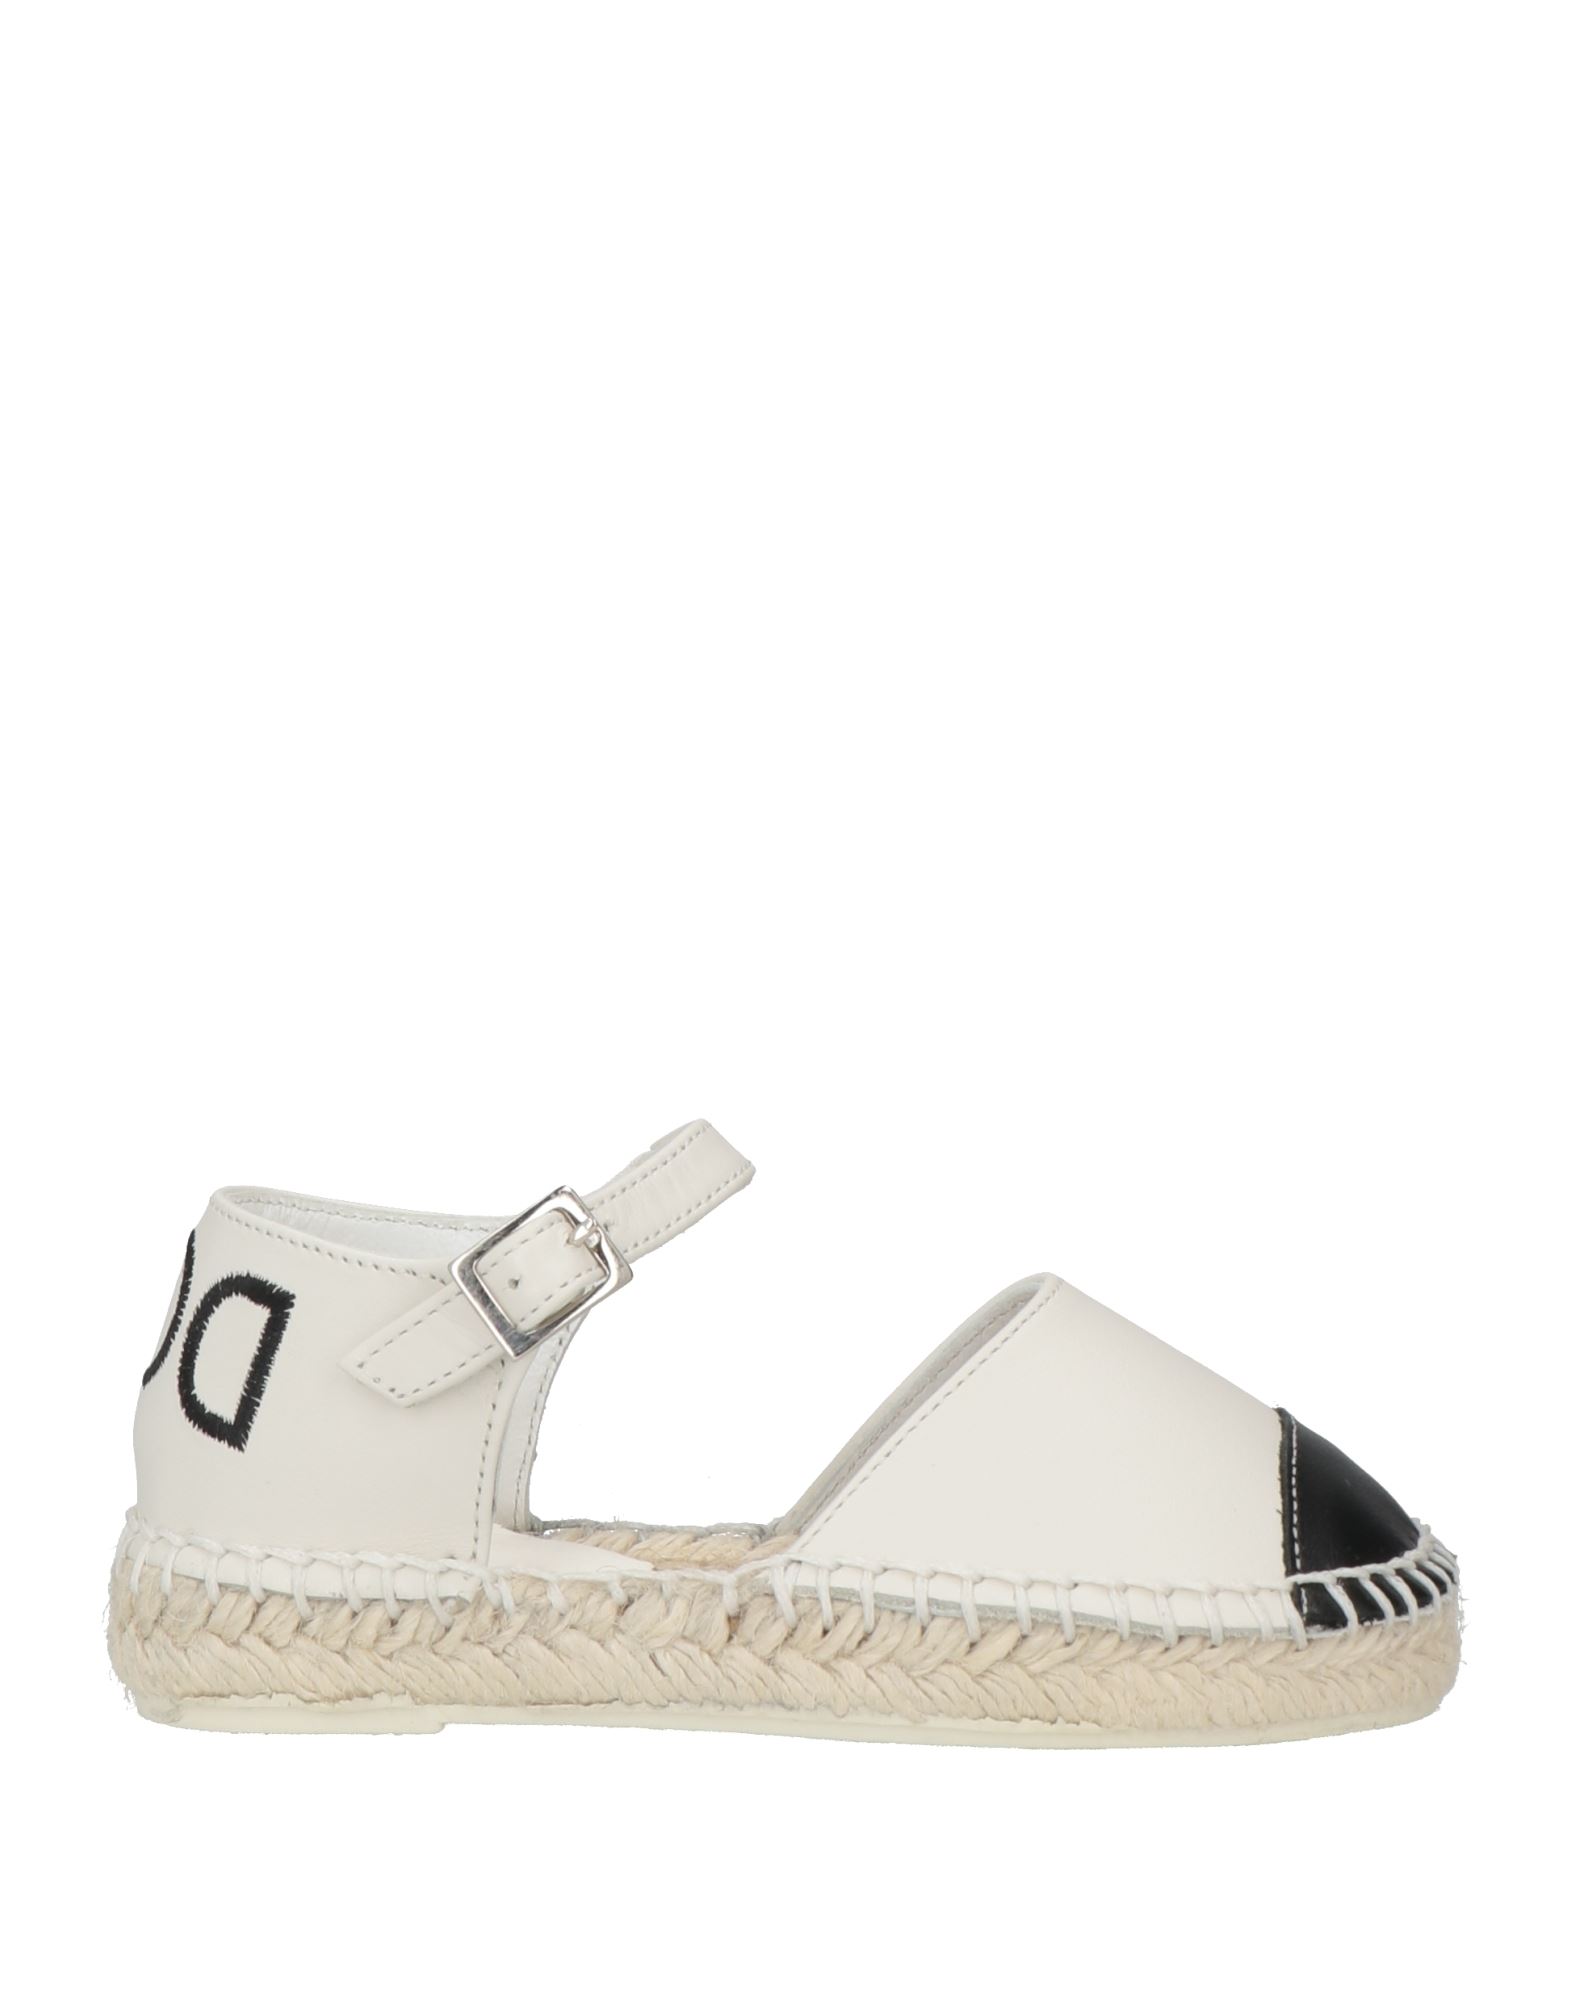 Shop Douuod Toddler Girl Espadrilles White Size 10c Soft Leather